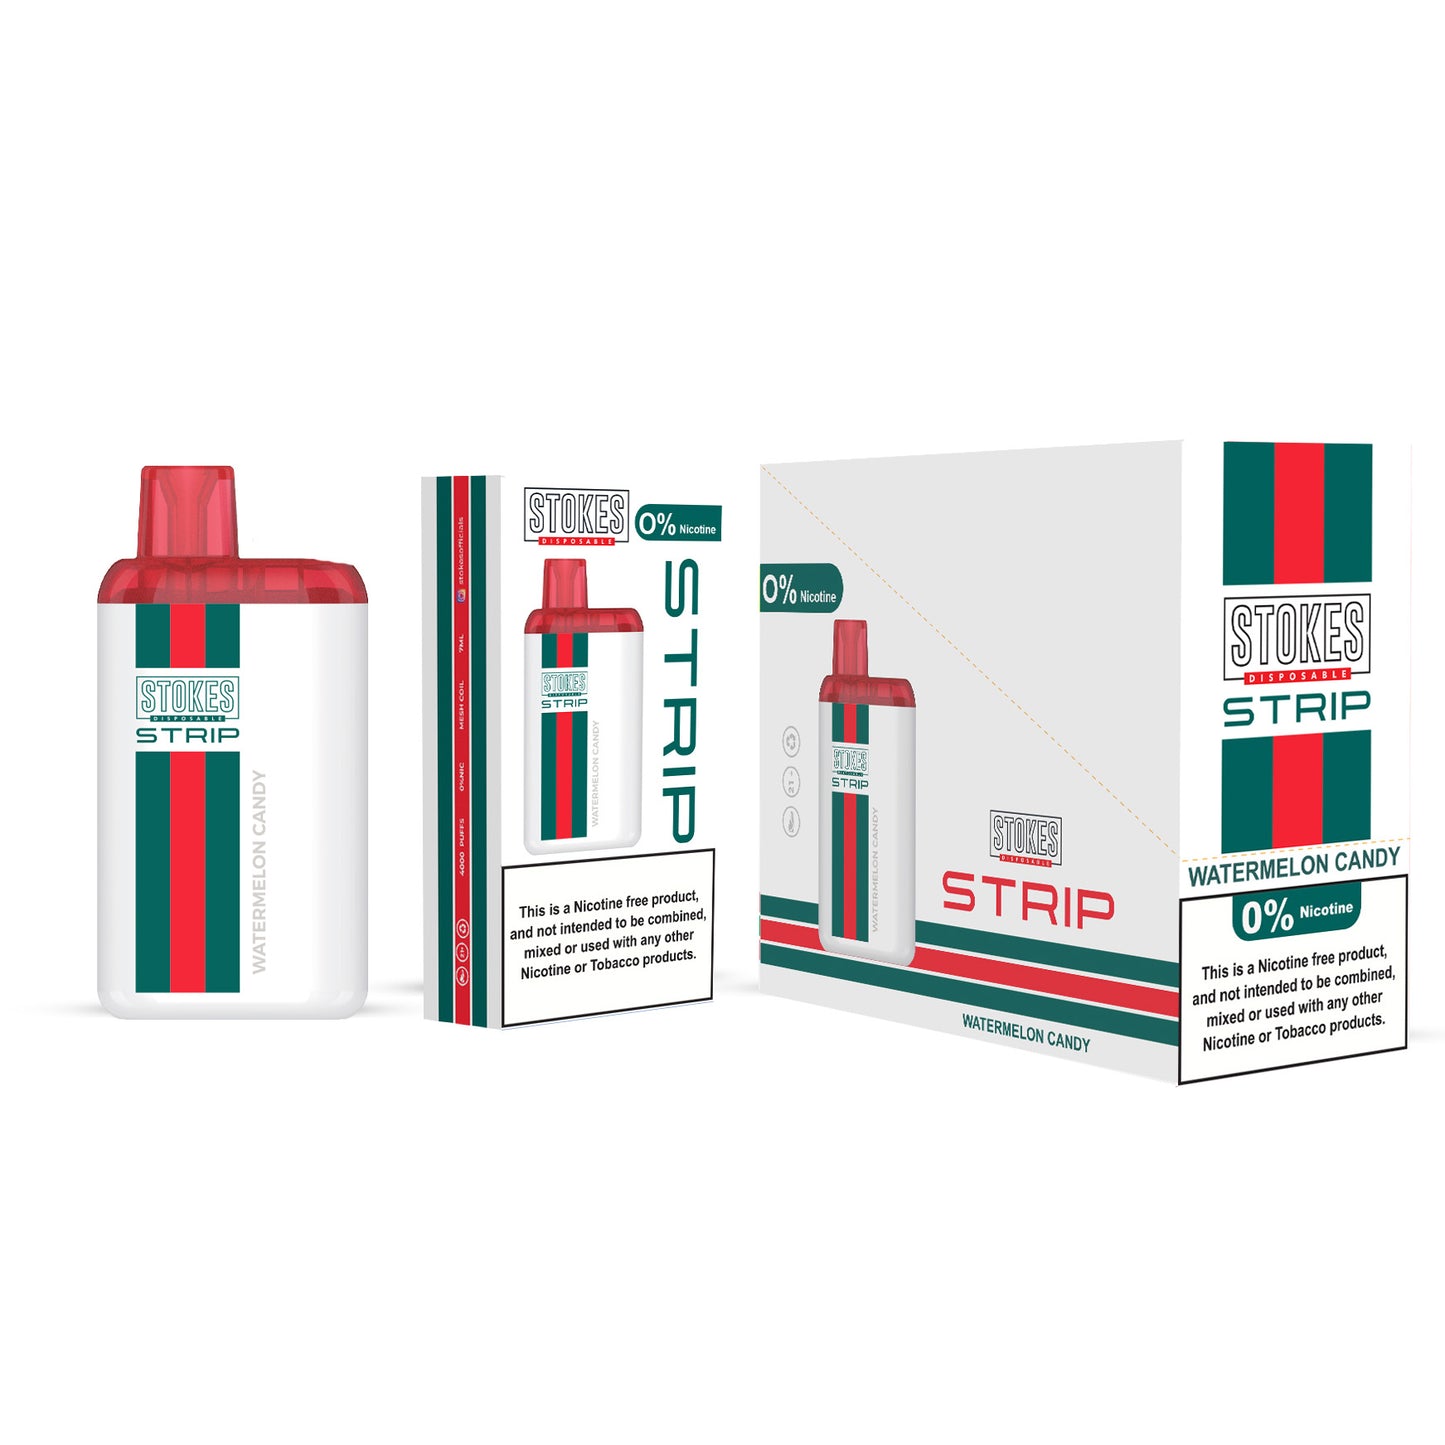 STOKES Strip - 0% Nic. (Disposable Device) - 4000 puffs - Watermelon Candy